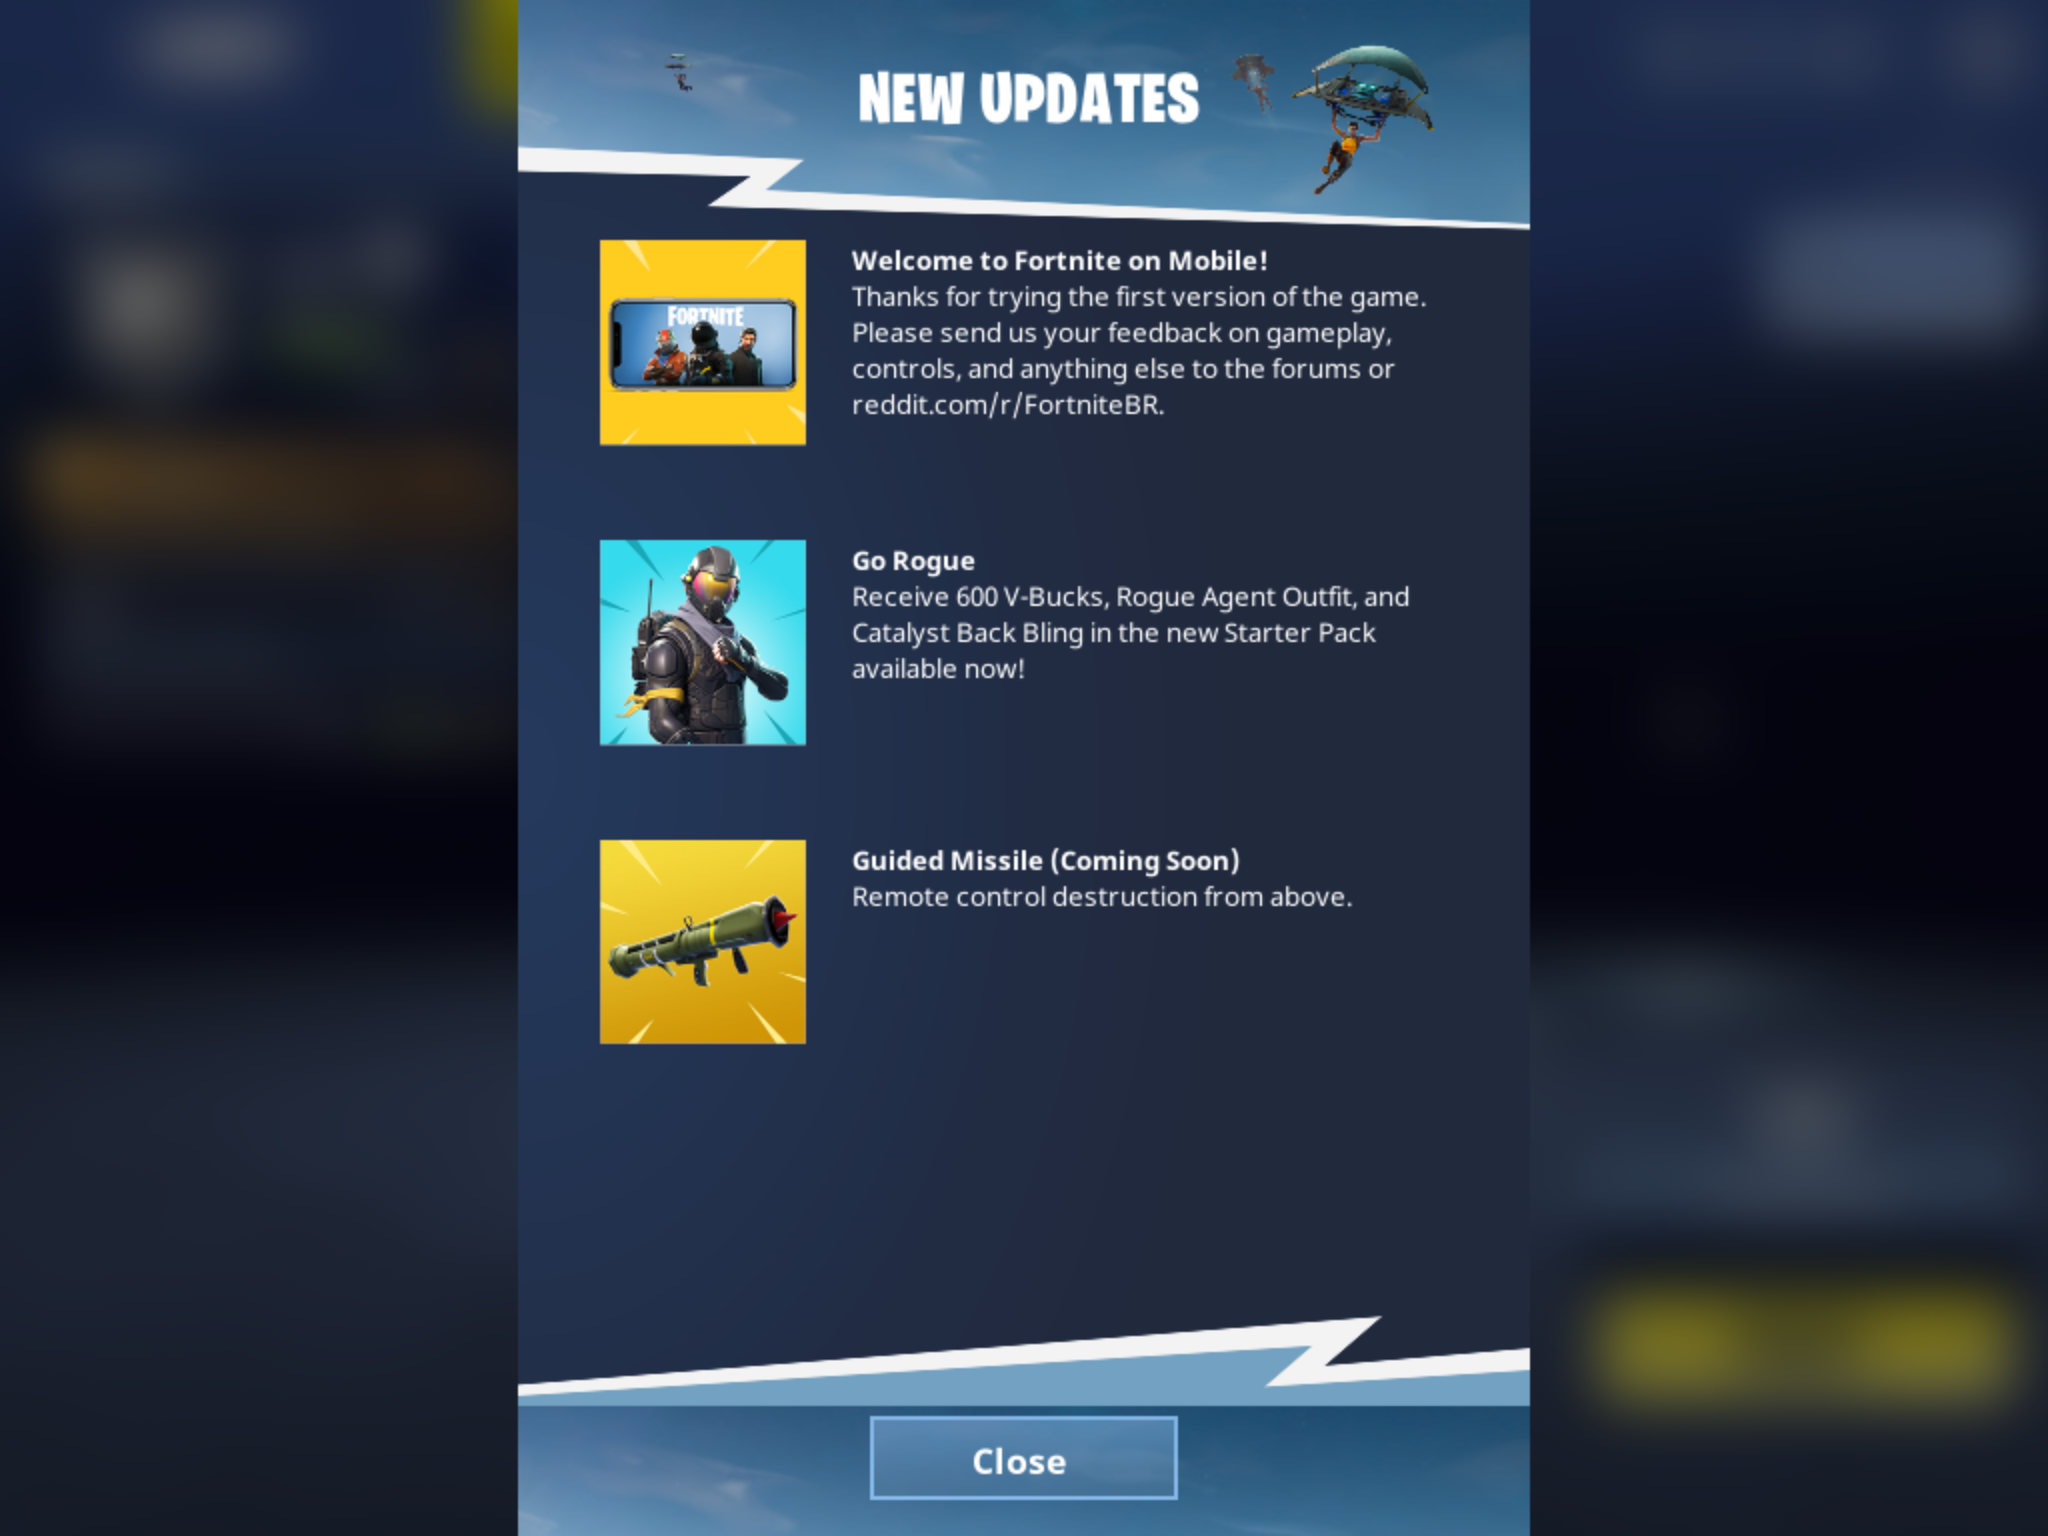 ‘Fortnite’ Introduces Starter Pack with V-Bucks and Outfit ... - 2048 x 1536 png 1097kB